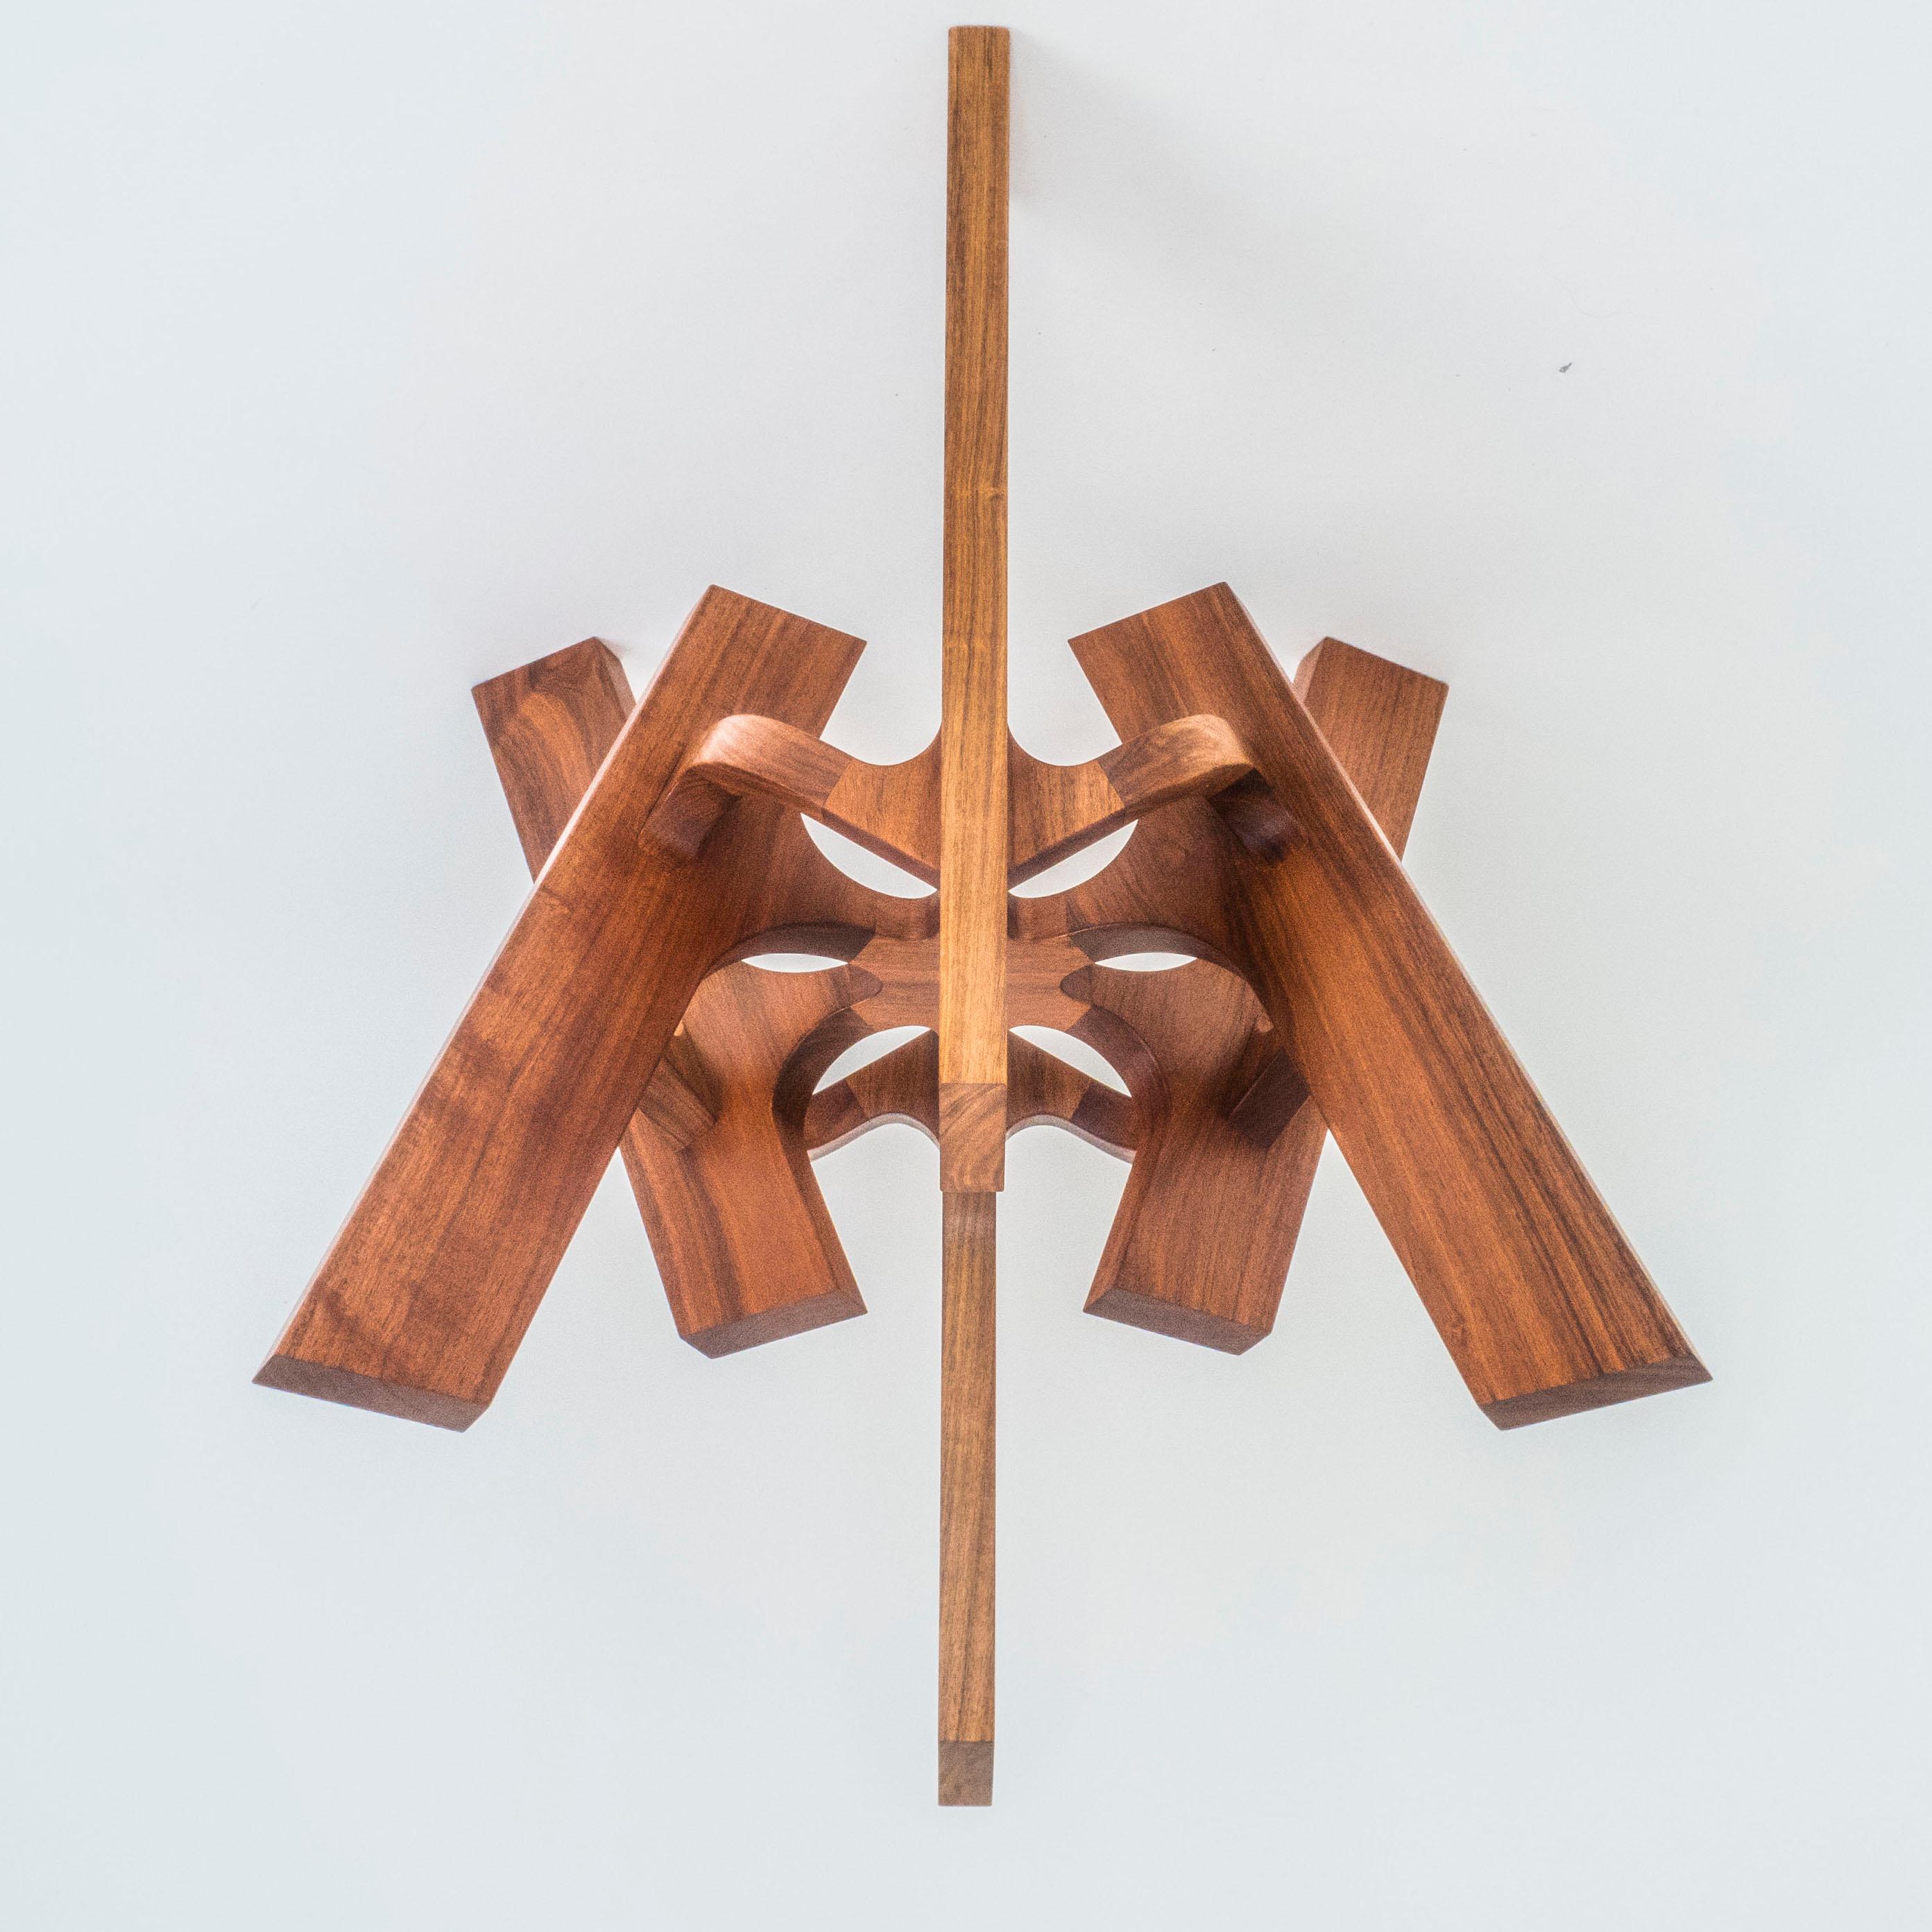 Astra, Geometric Sculptural Center Table Made of Solid Wood by Pedro Cerisola For Sale 4